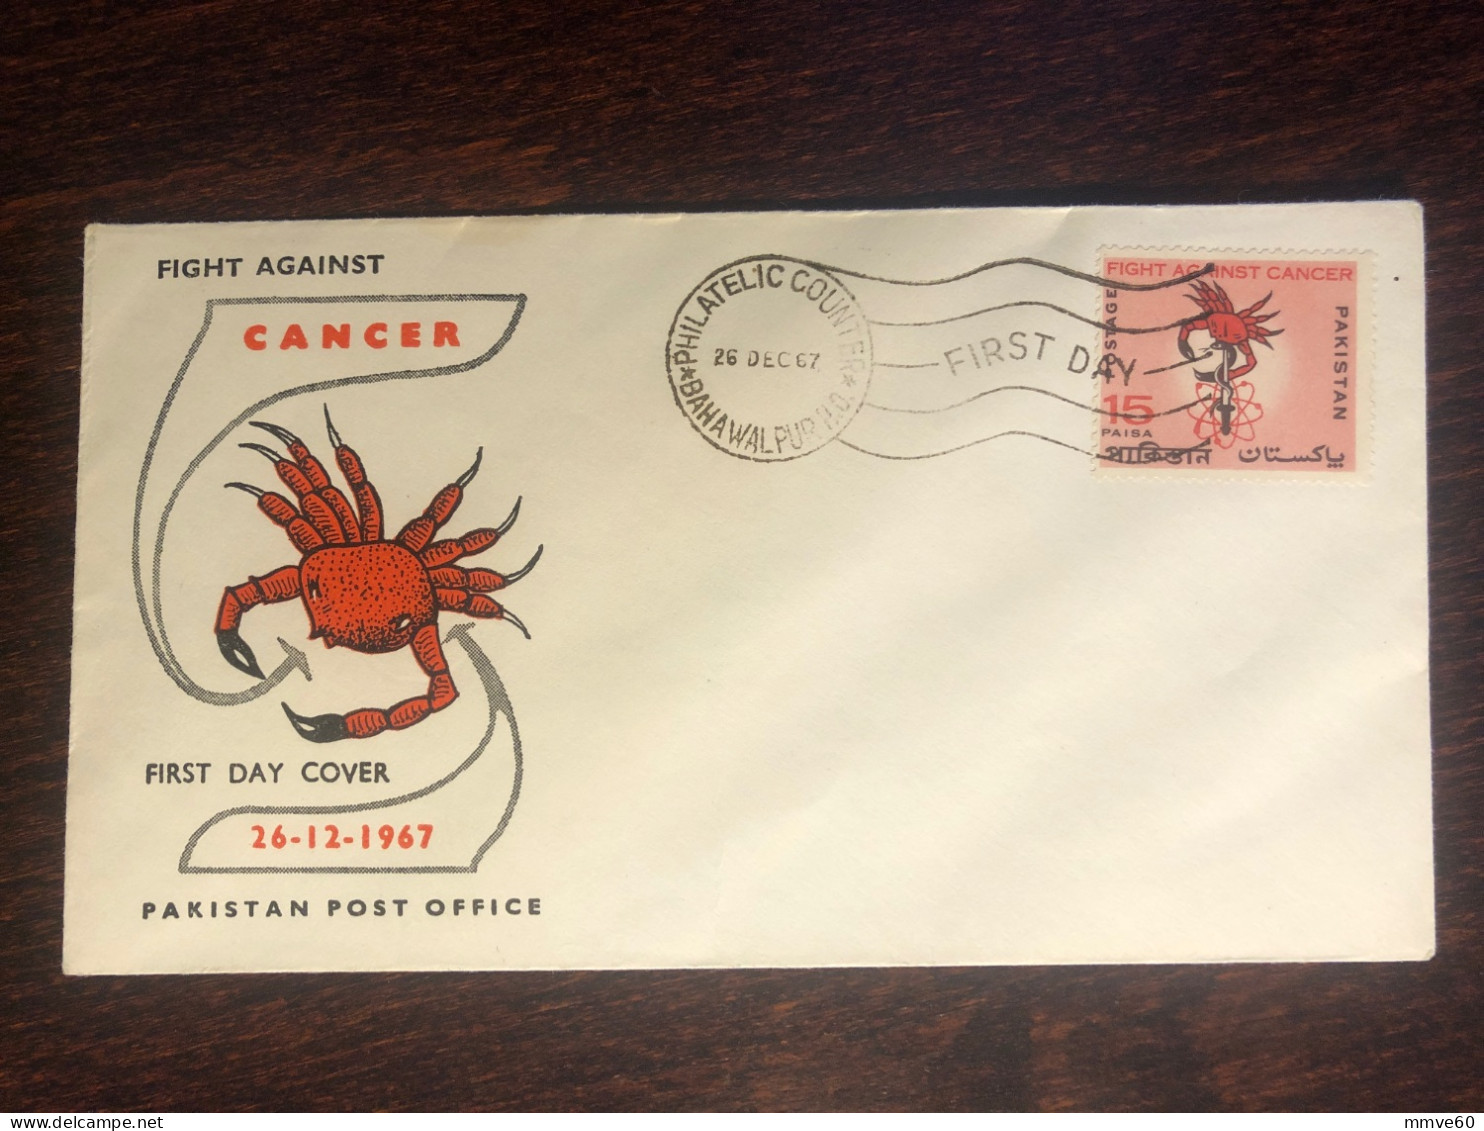 PAKISTAN FDC COVER 1967 YEAR CANCER ONCOLOGY HEALTH MEDICINE STAMPS - Pakistan